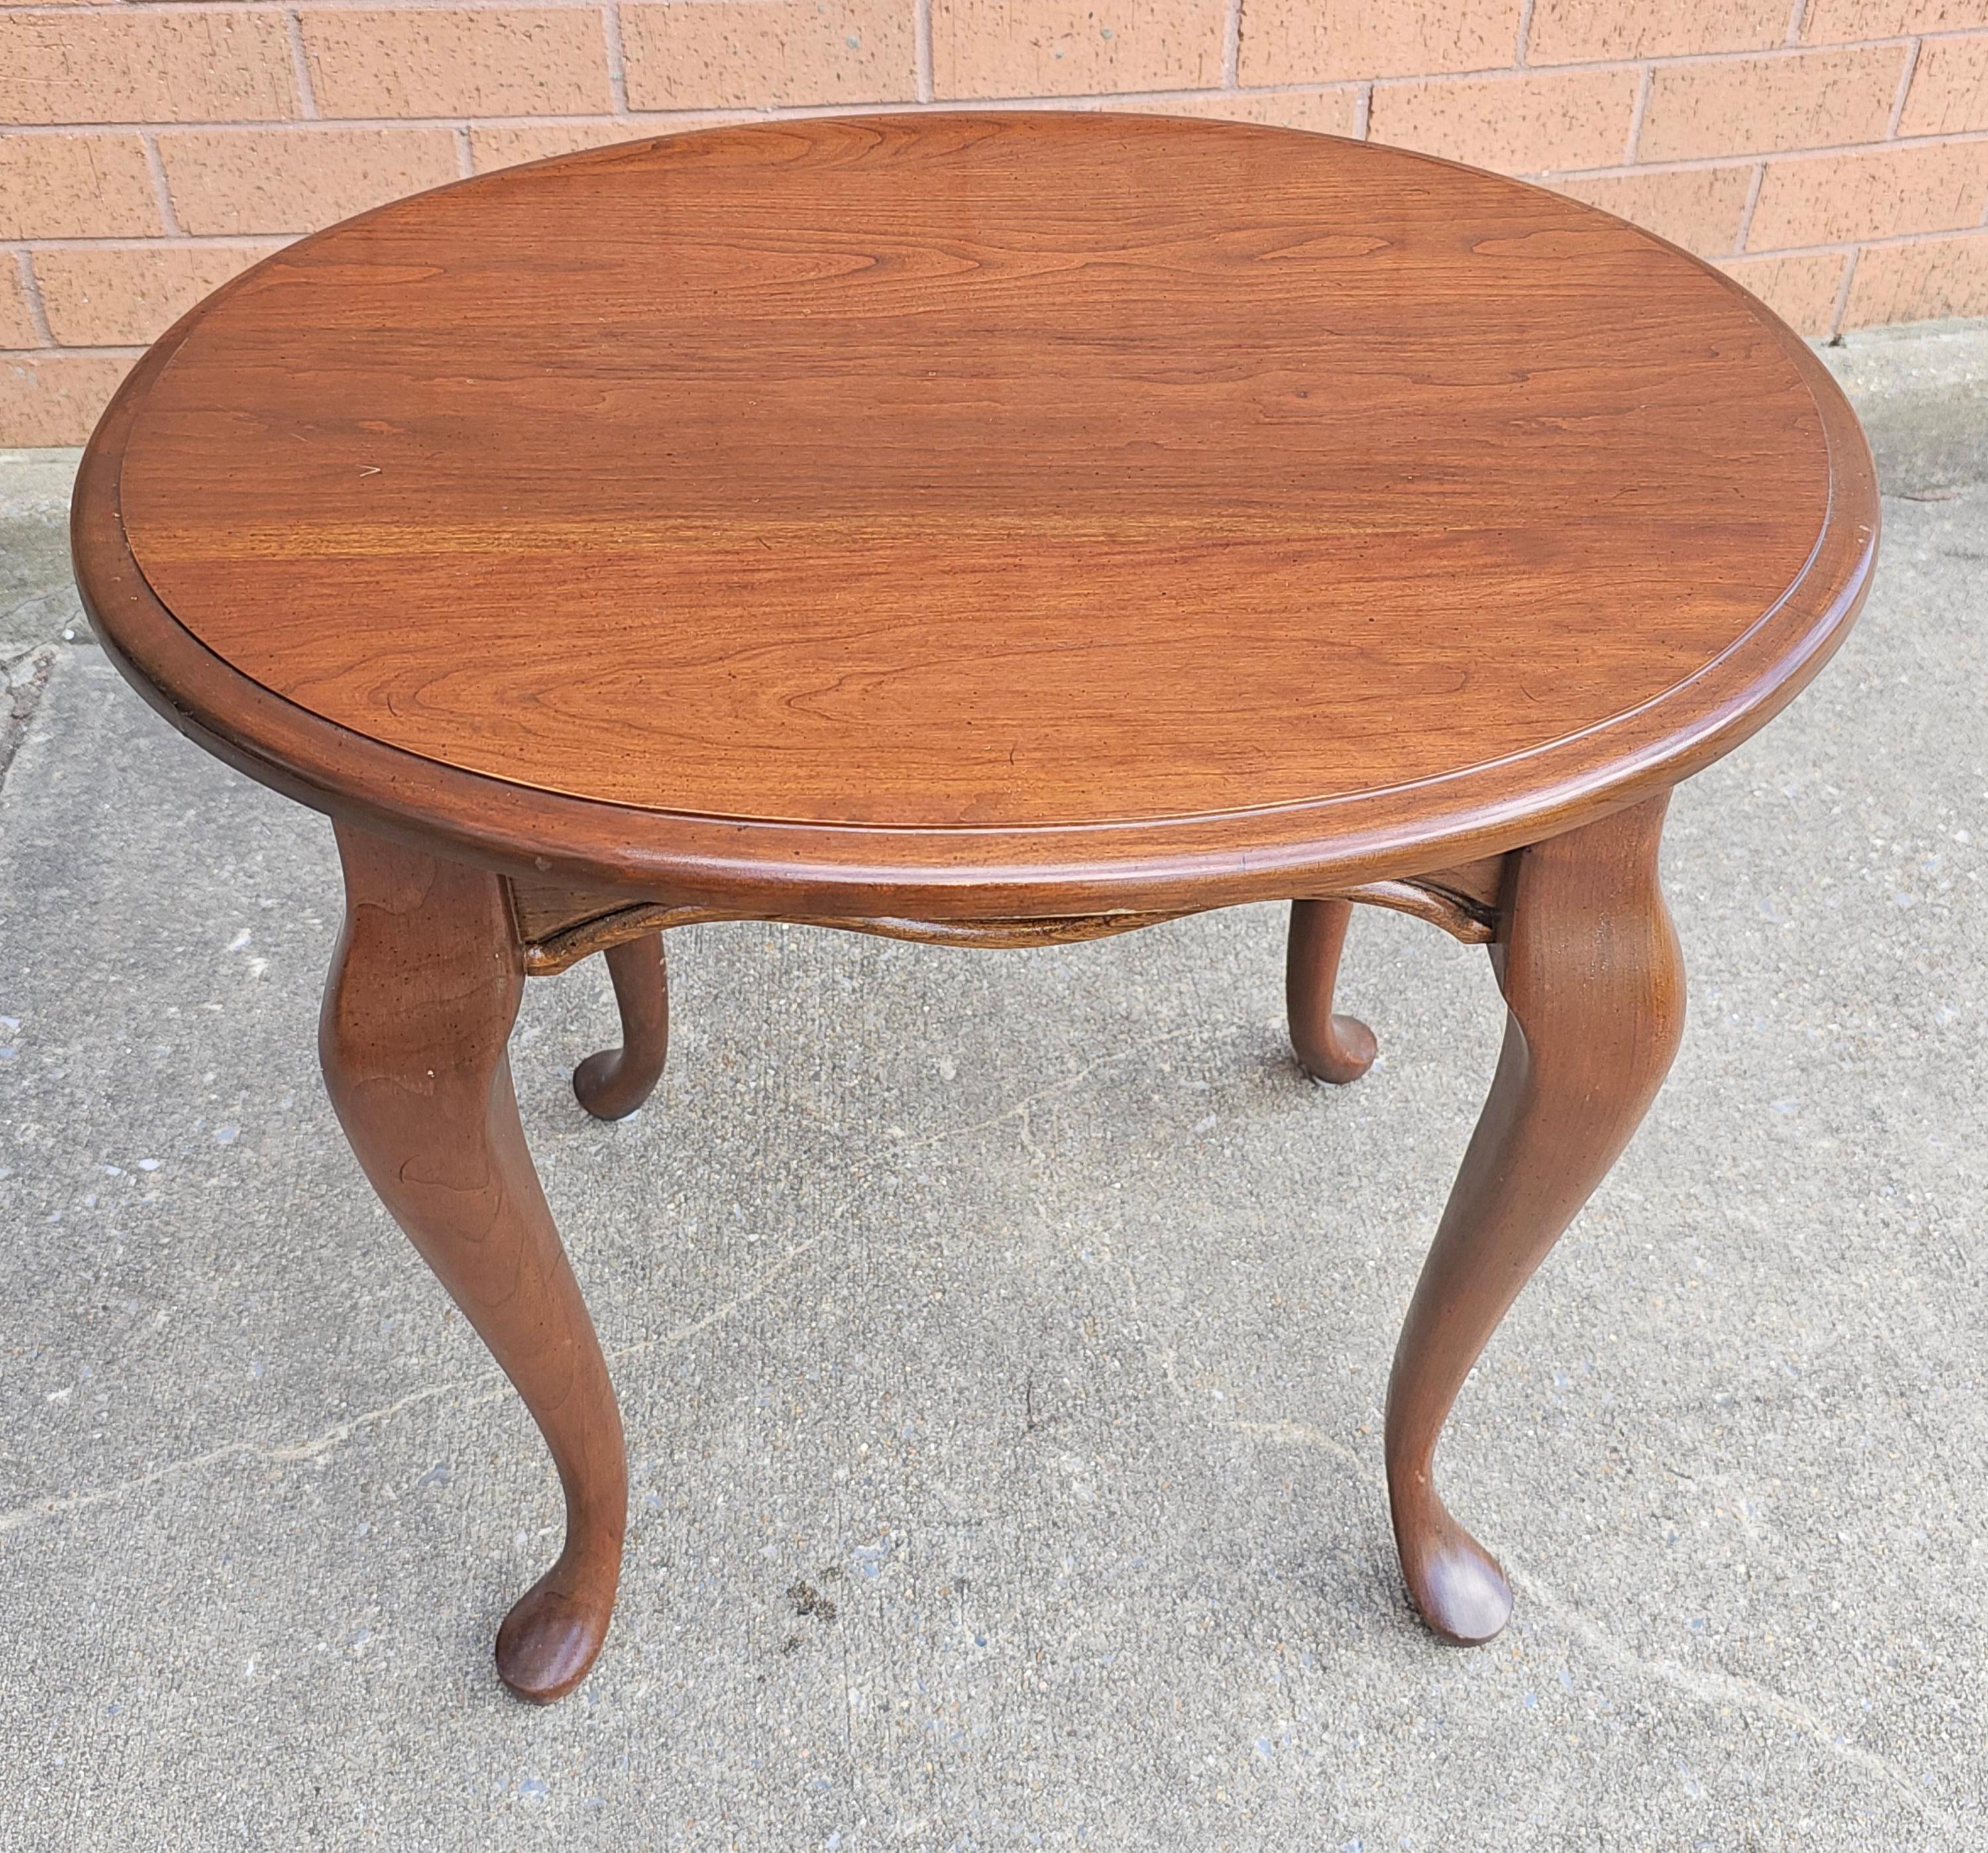 20th Century Queen Anne Style Cherry Oval Side Table In Good Condition For Sale In Germantown, MD